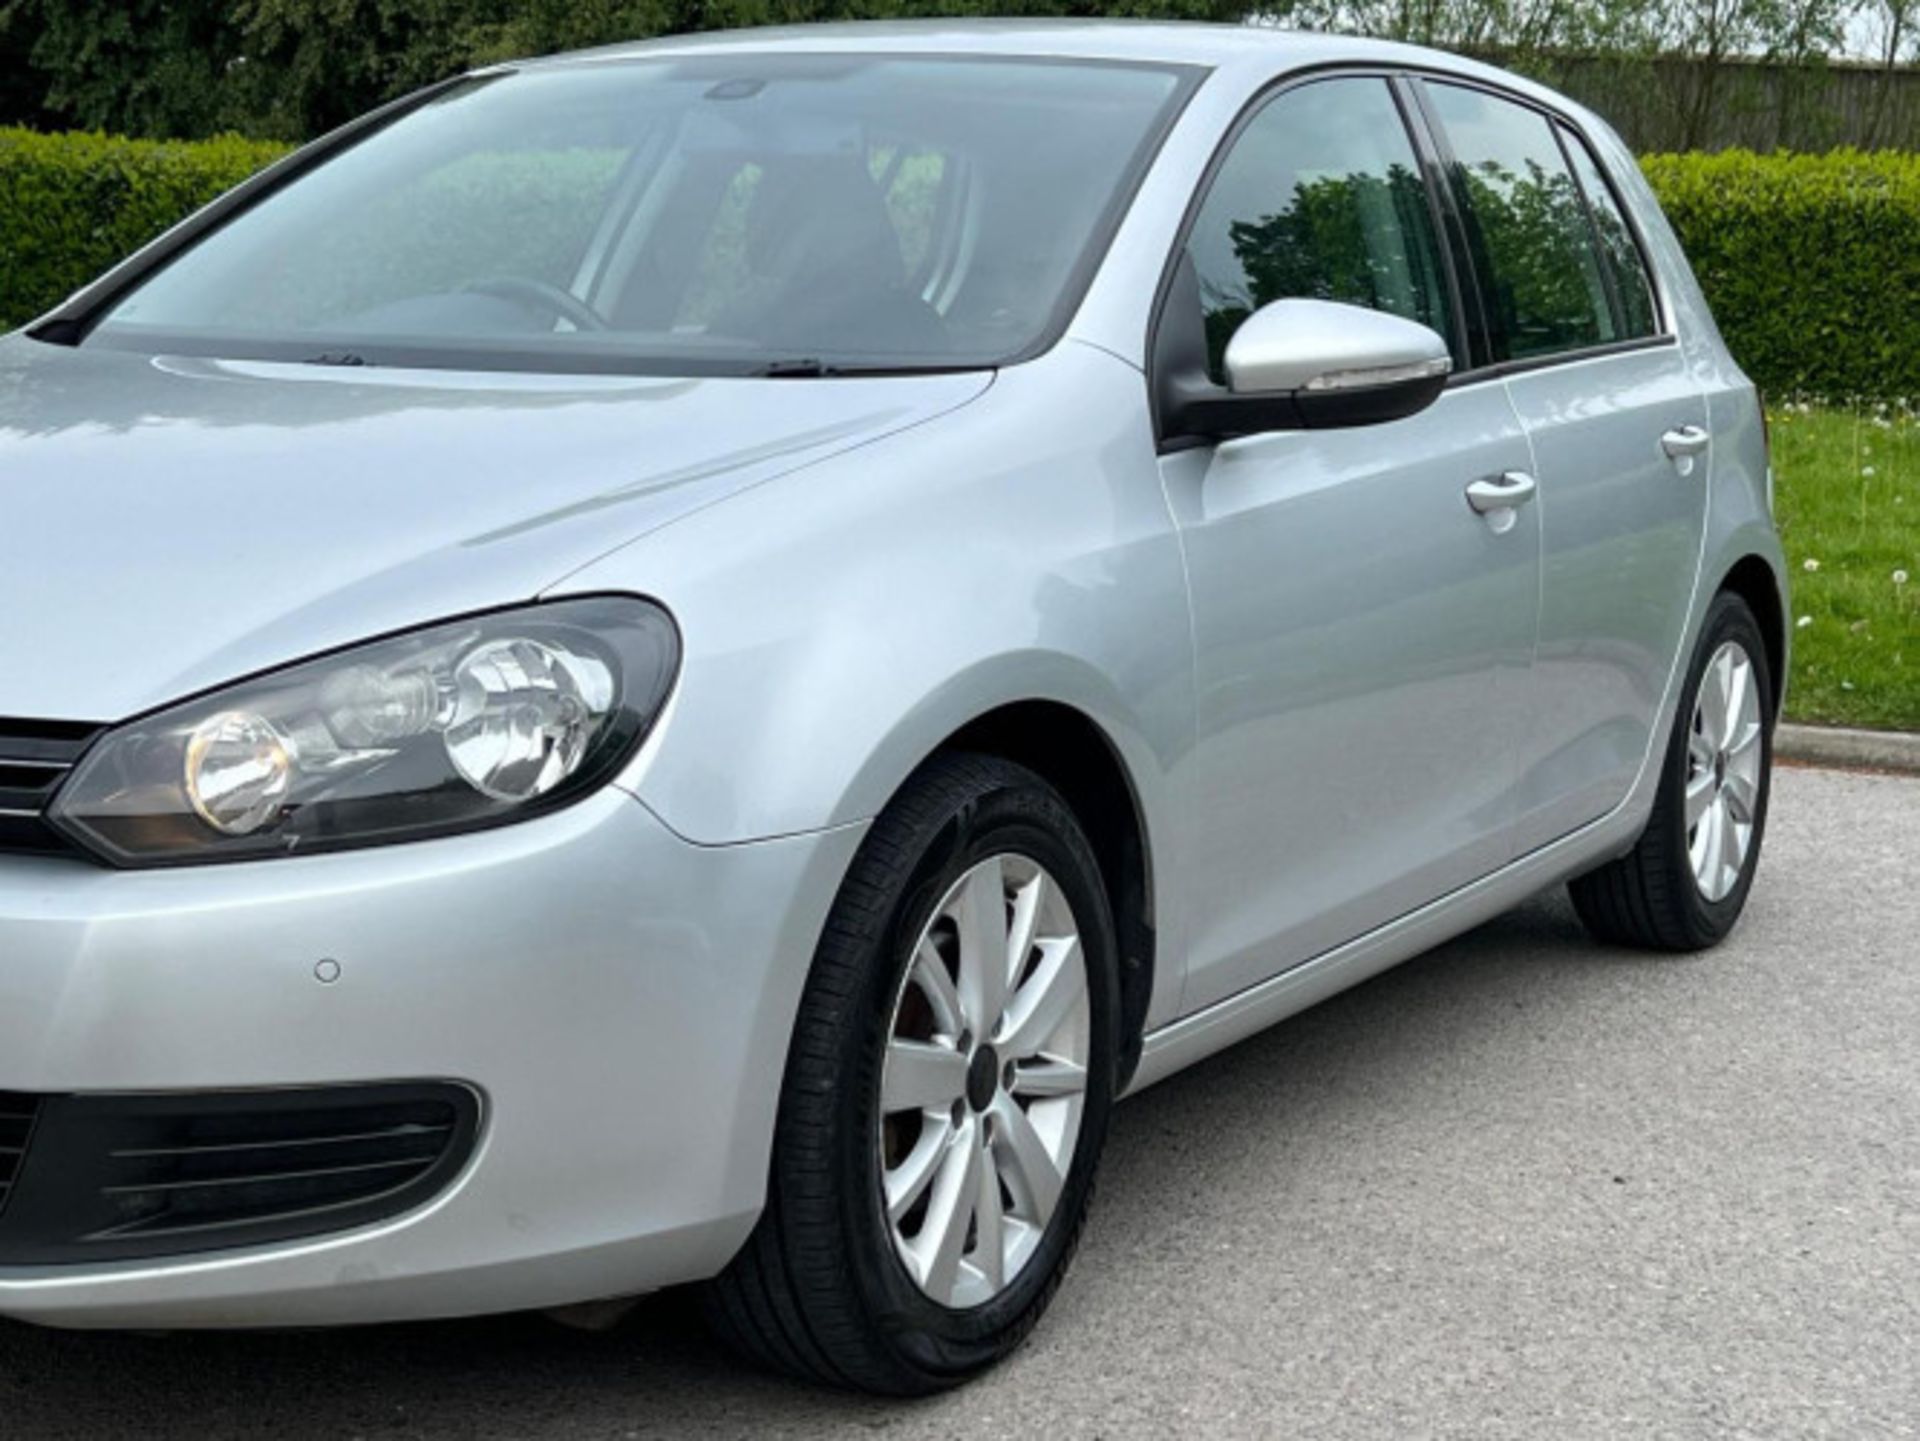 IMPECCABLE 2012 VOLKSWAGEN GOLF 1.6 TDI MATCH >>--NO VAT ON HAMMER--<< - Image 115 of 116